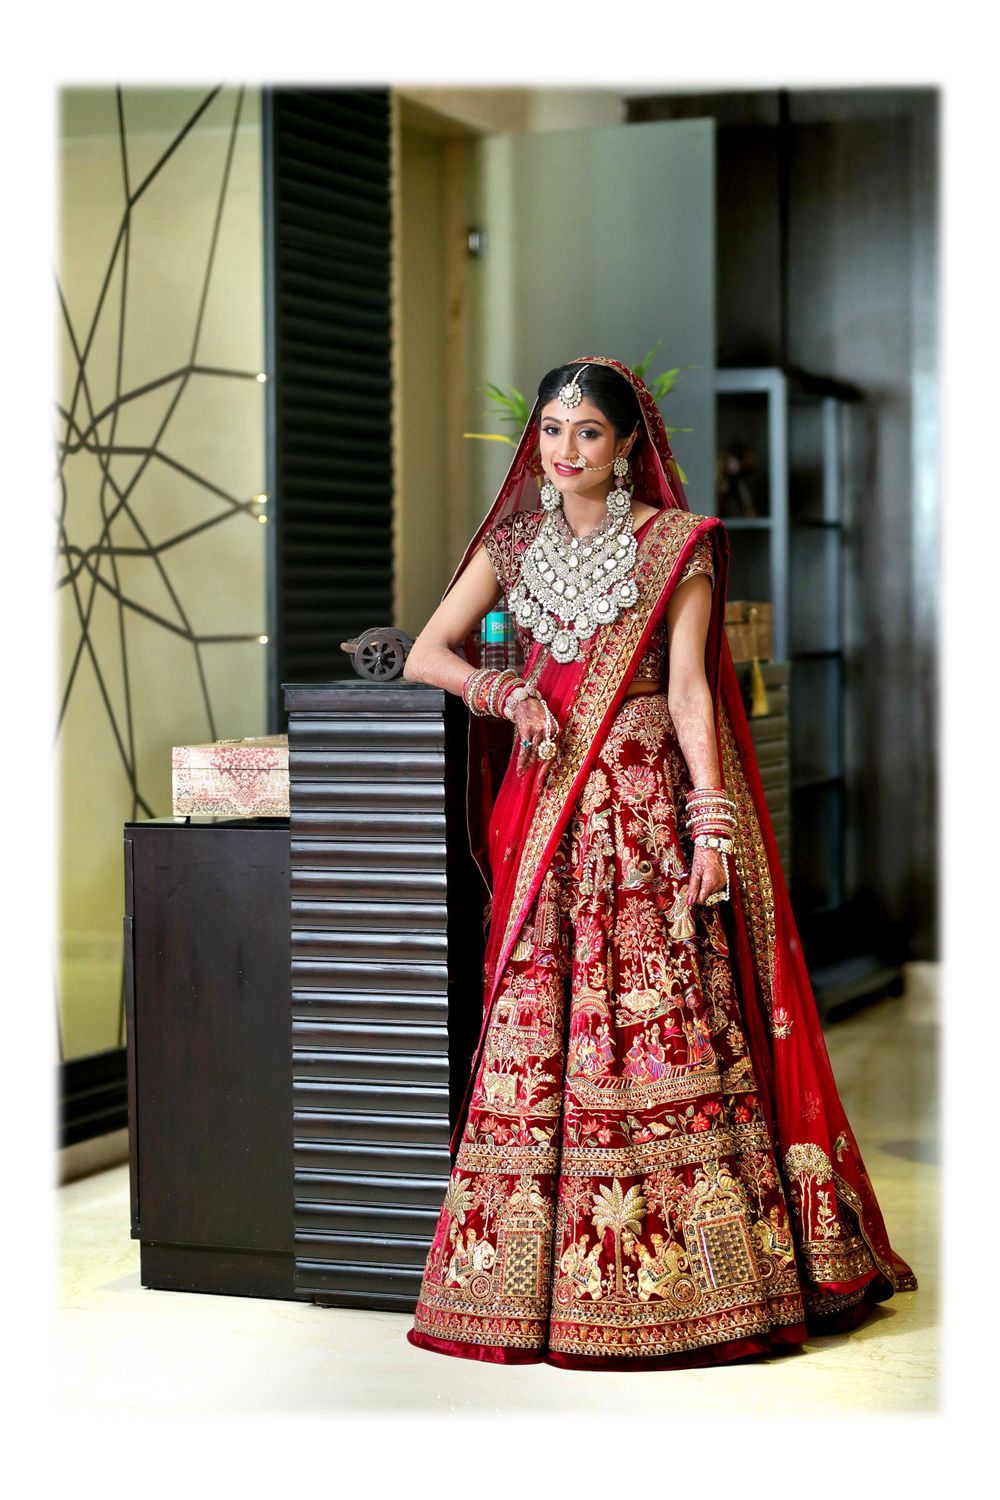 Photo of A bride in a maroon lehenga and exquisite jewellery